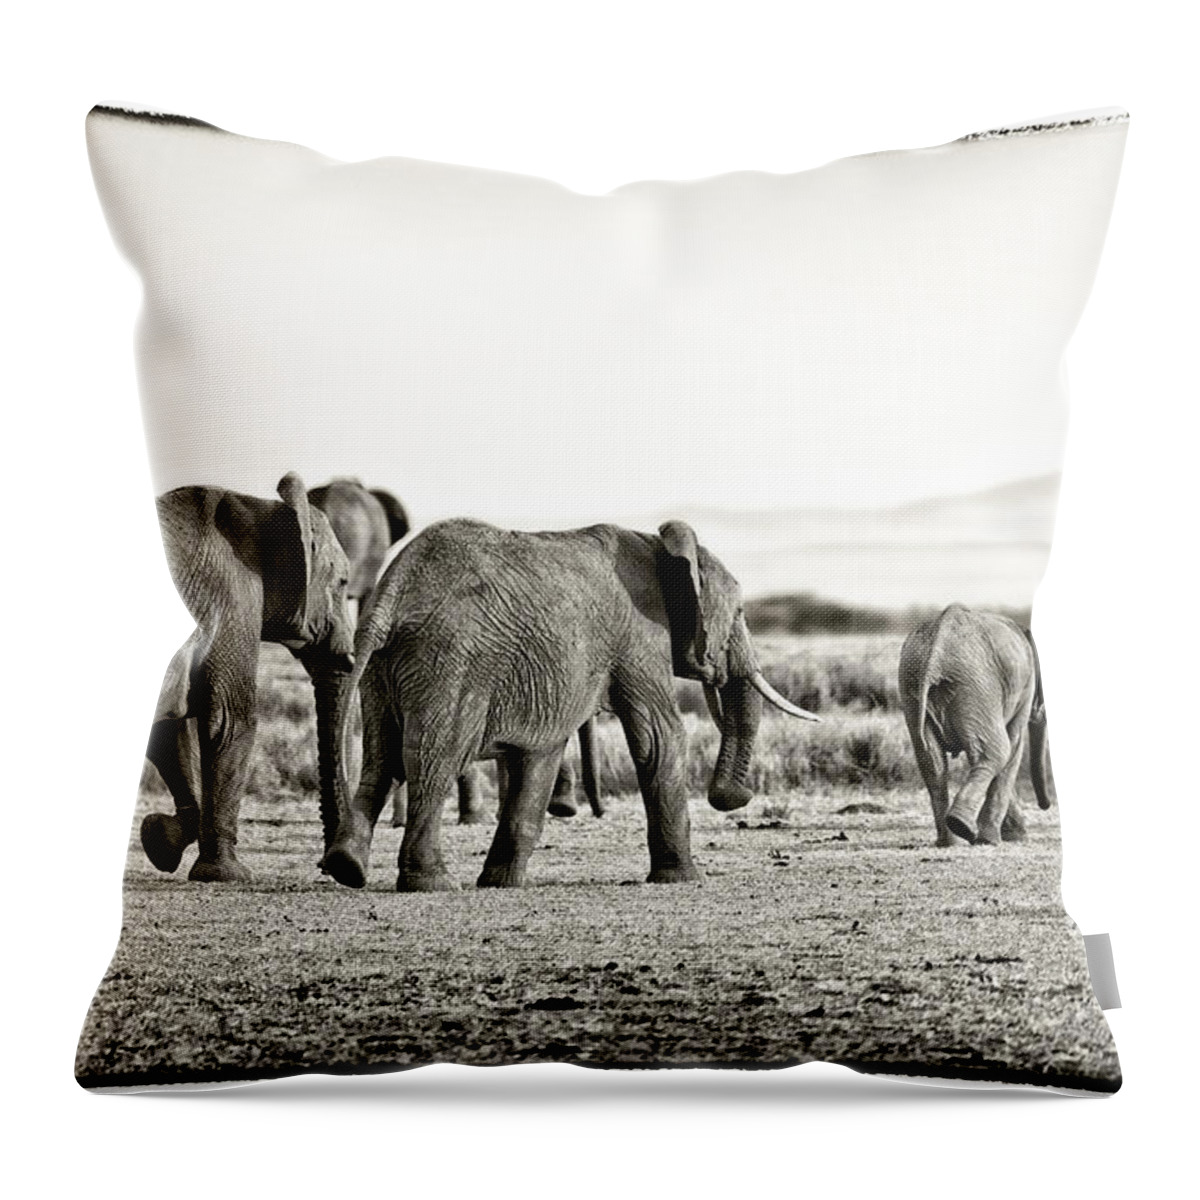 Africa Throw Pillow featuring the photograph African Elephants in the Masai Mara by Perla Copernik